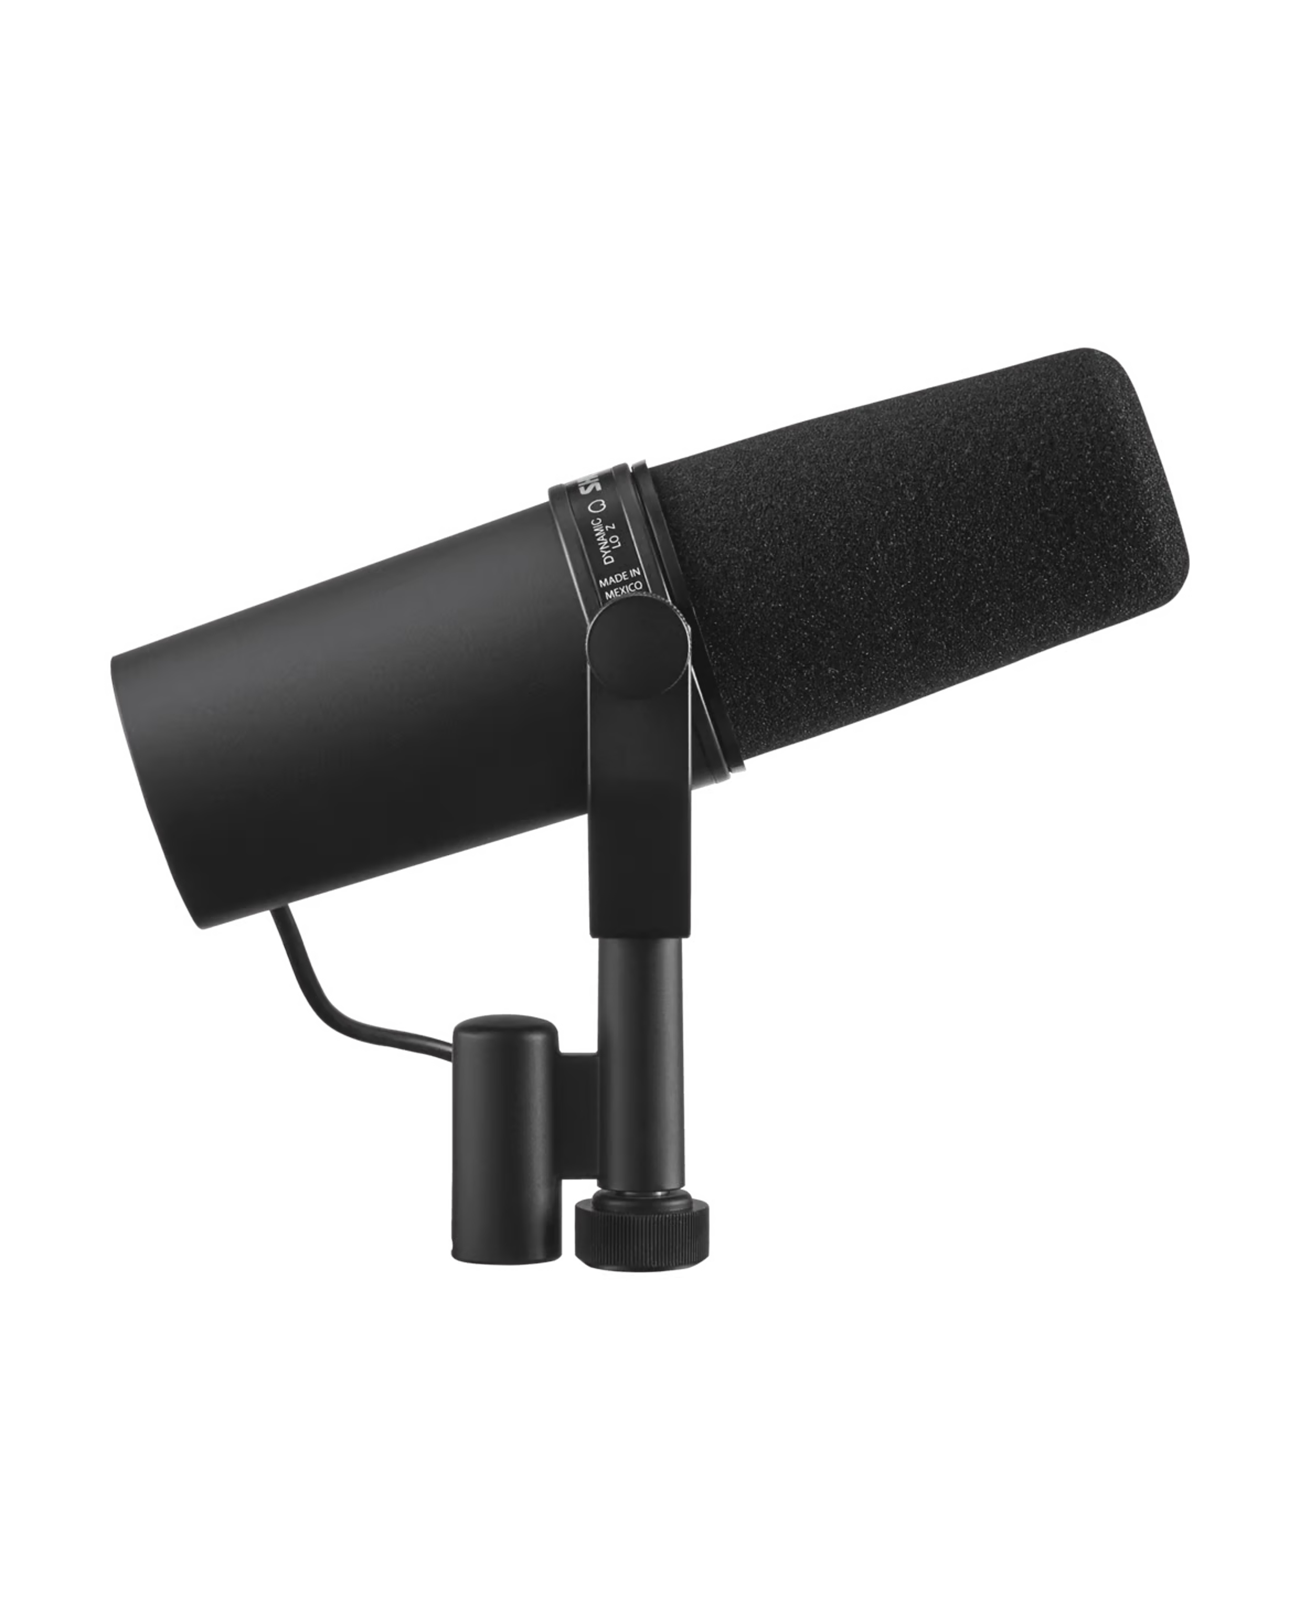 Shure SM7dB microphone launches with built-in preamp